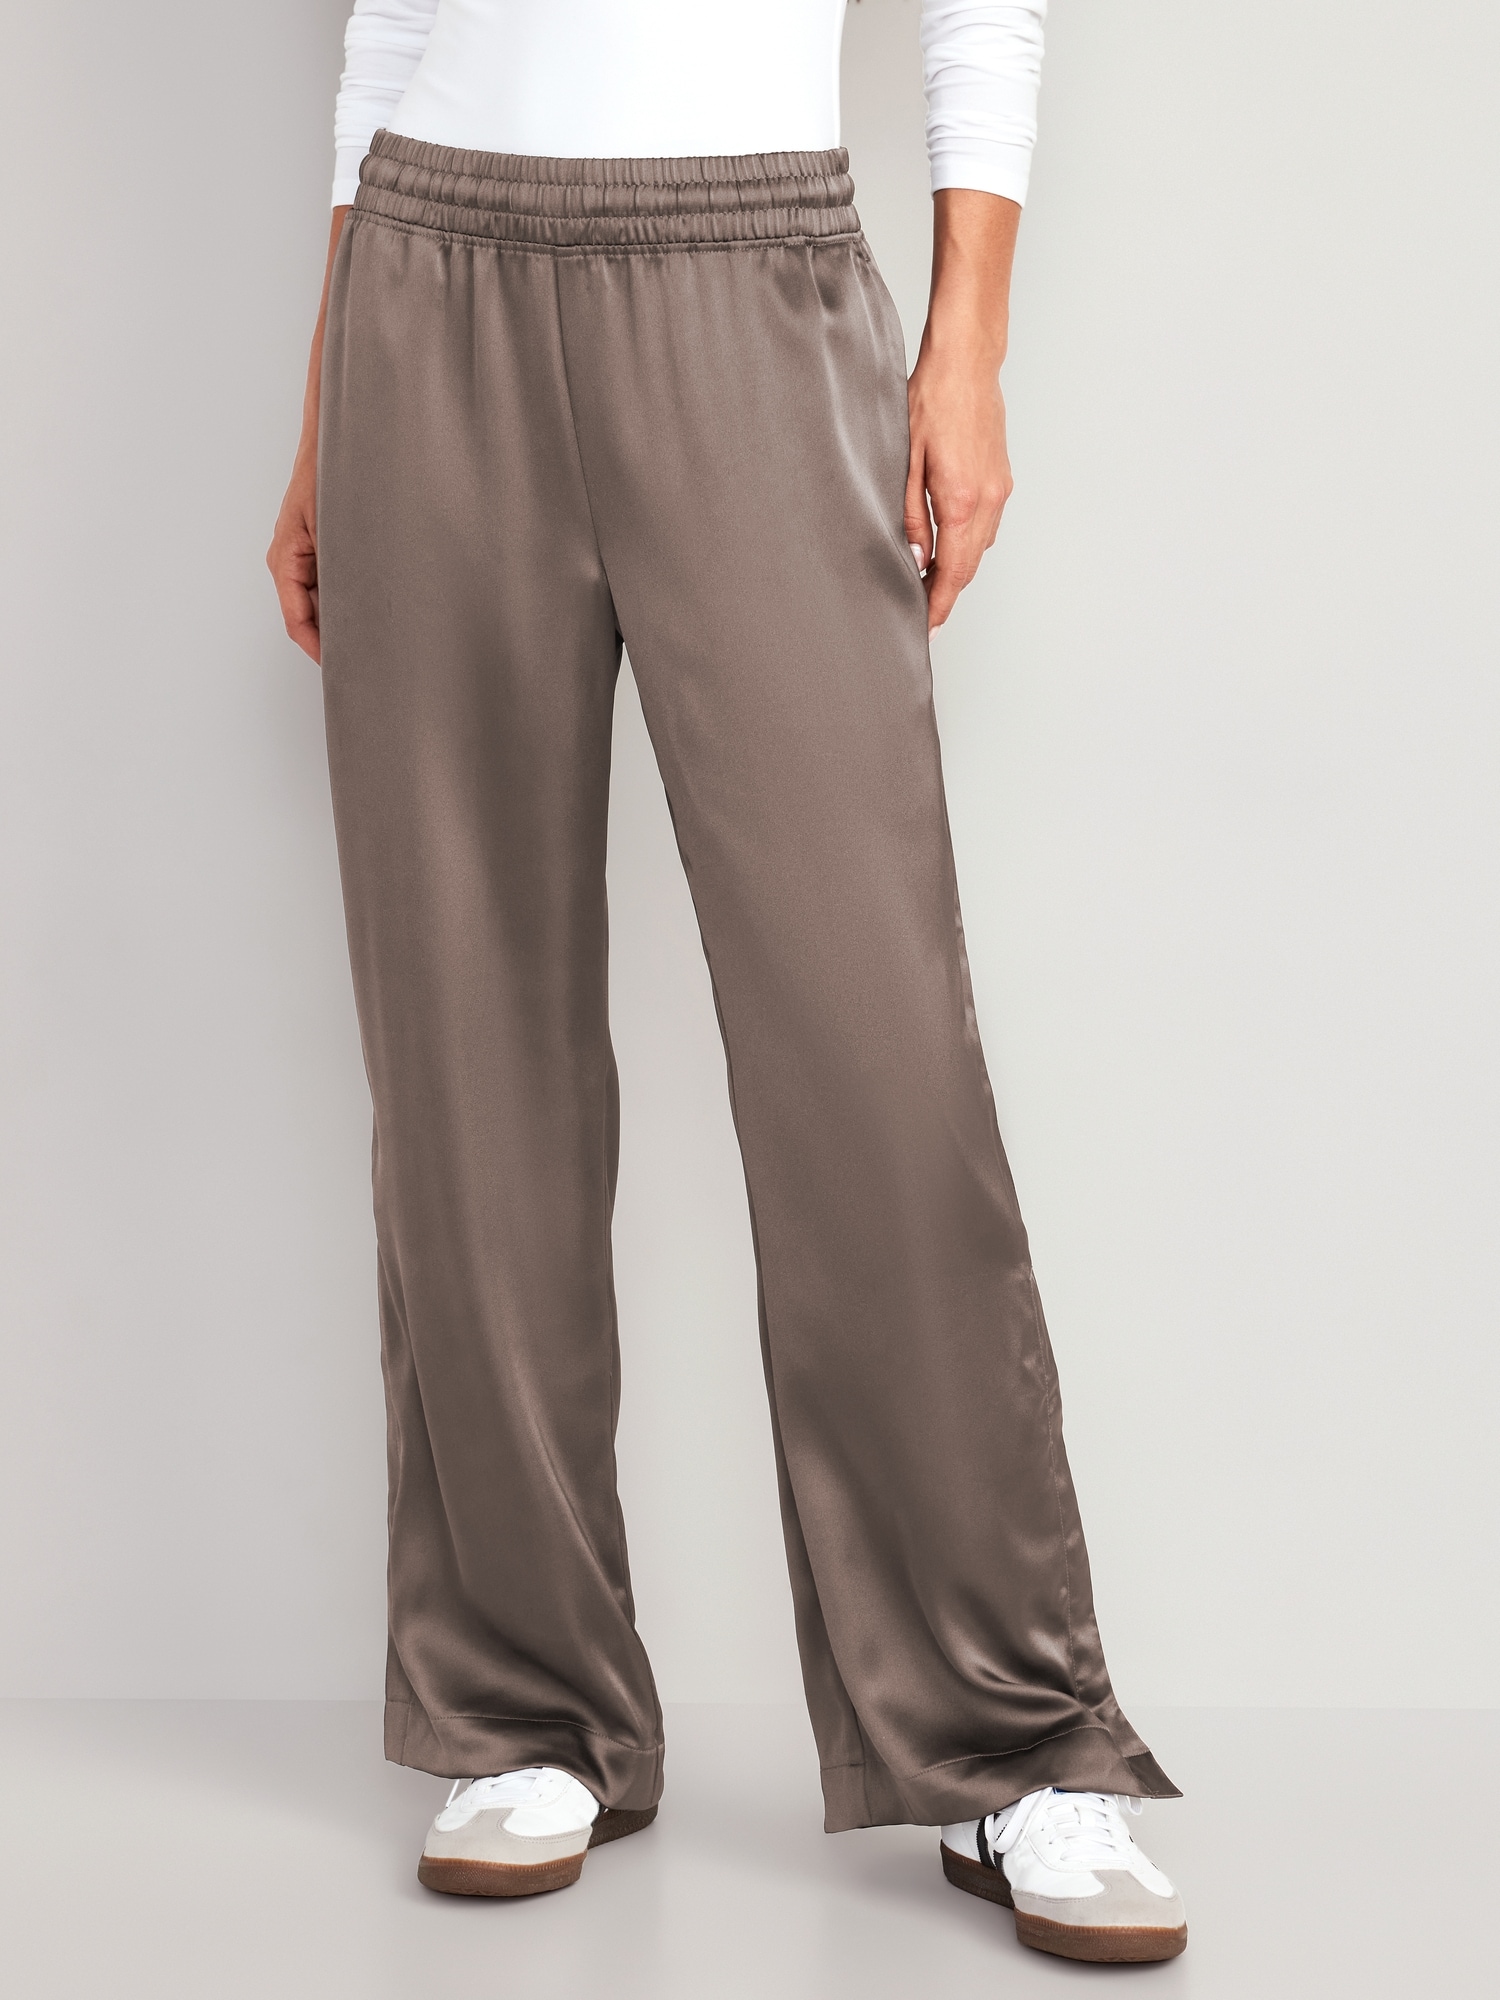 Women's Pants by   Track pants women, Dynasty clothing